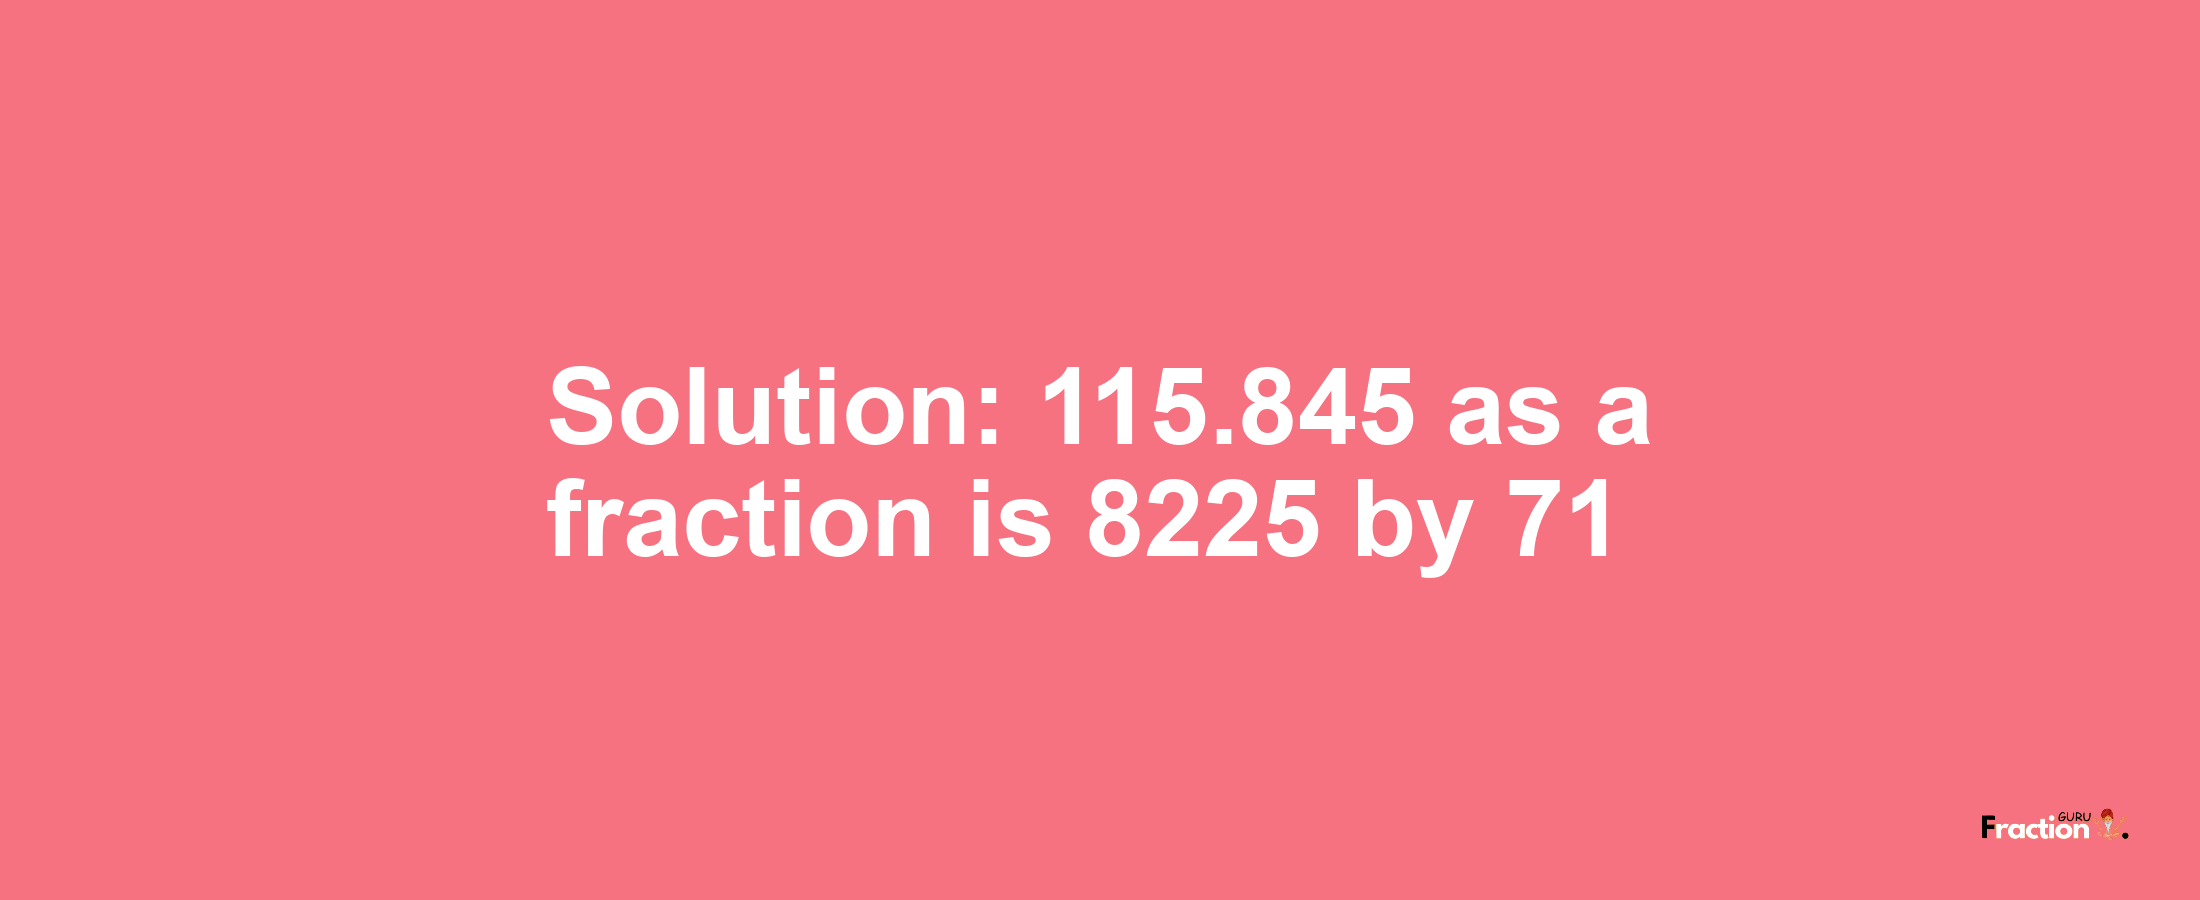 Solution:115.845 as a fraction is 8225/71